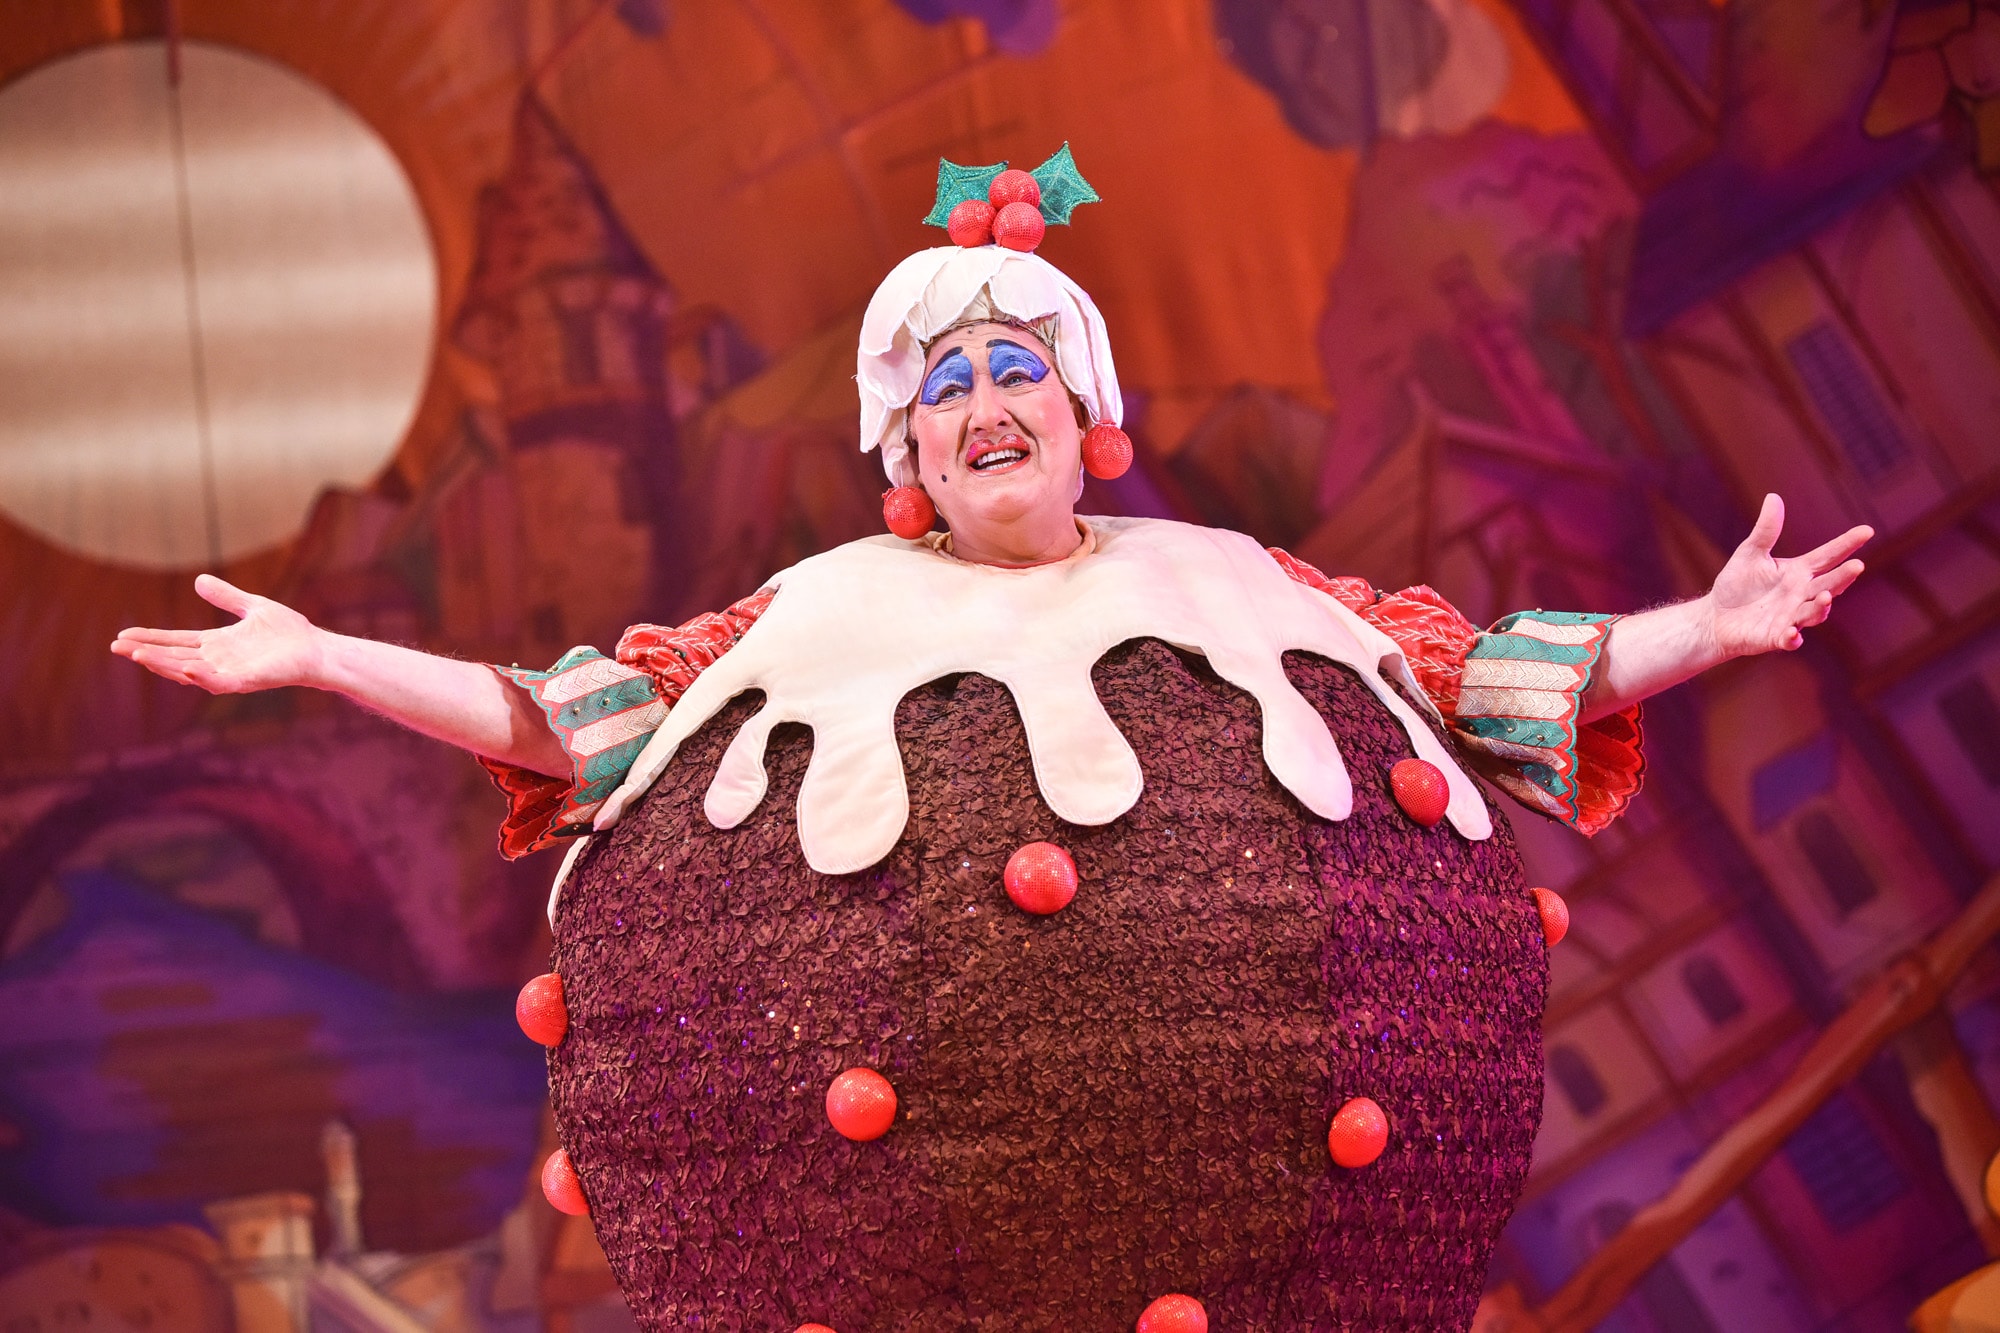 Iain Lauchlan as Matilda Pudding (Puss in Boots, 2019/20)